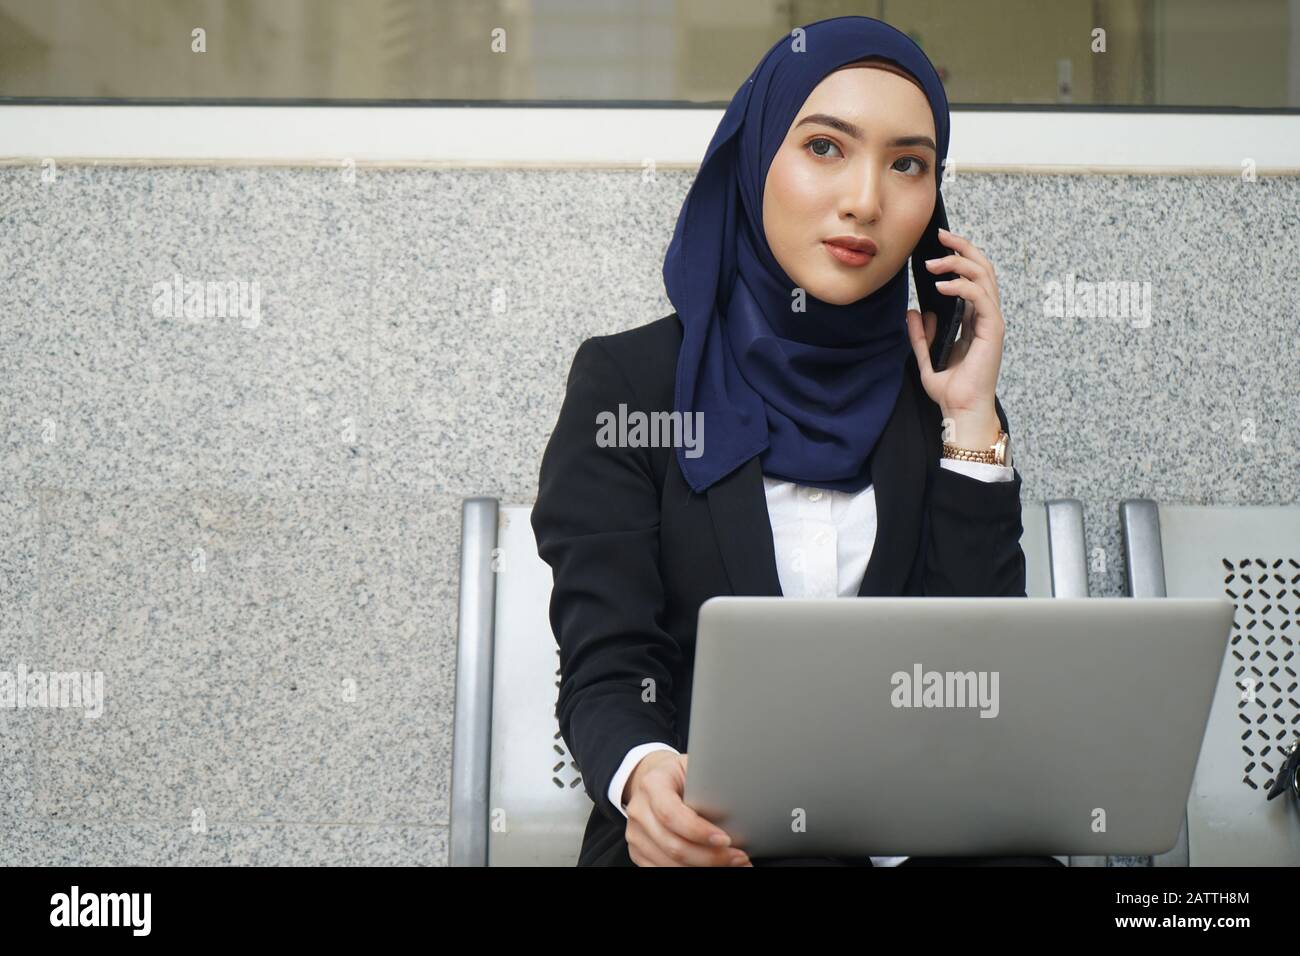 Attractive female muslim woman on a laptop and phone Stock Photo